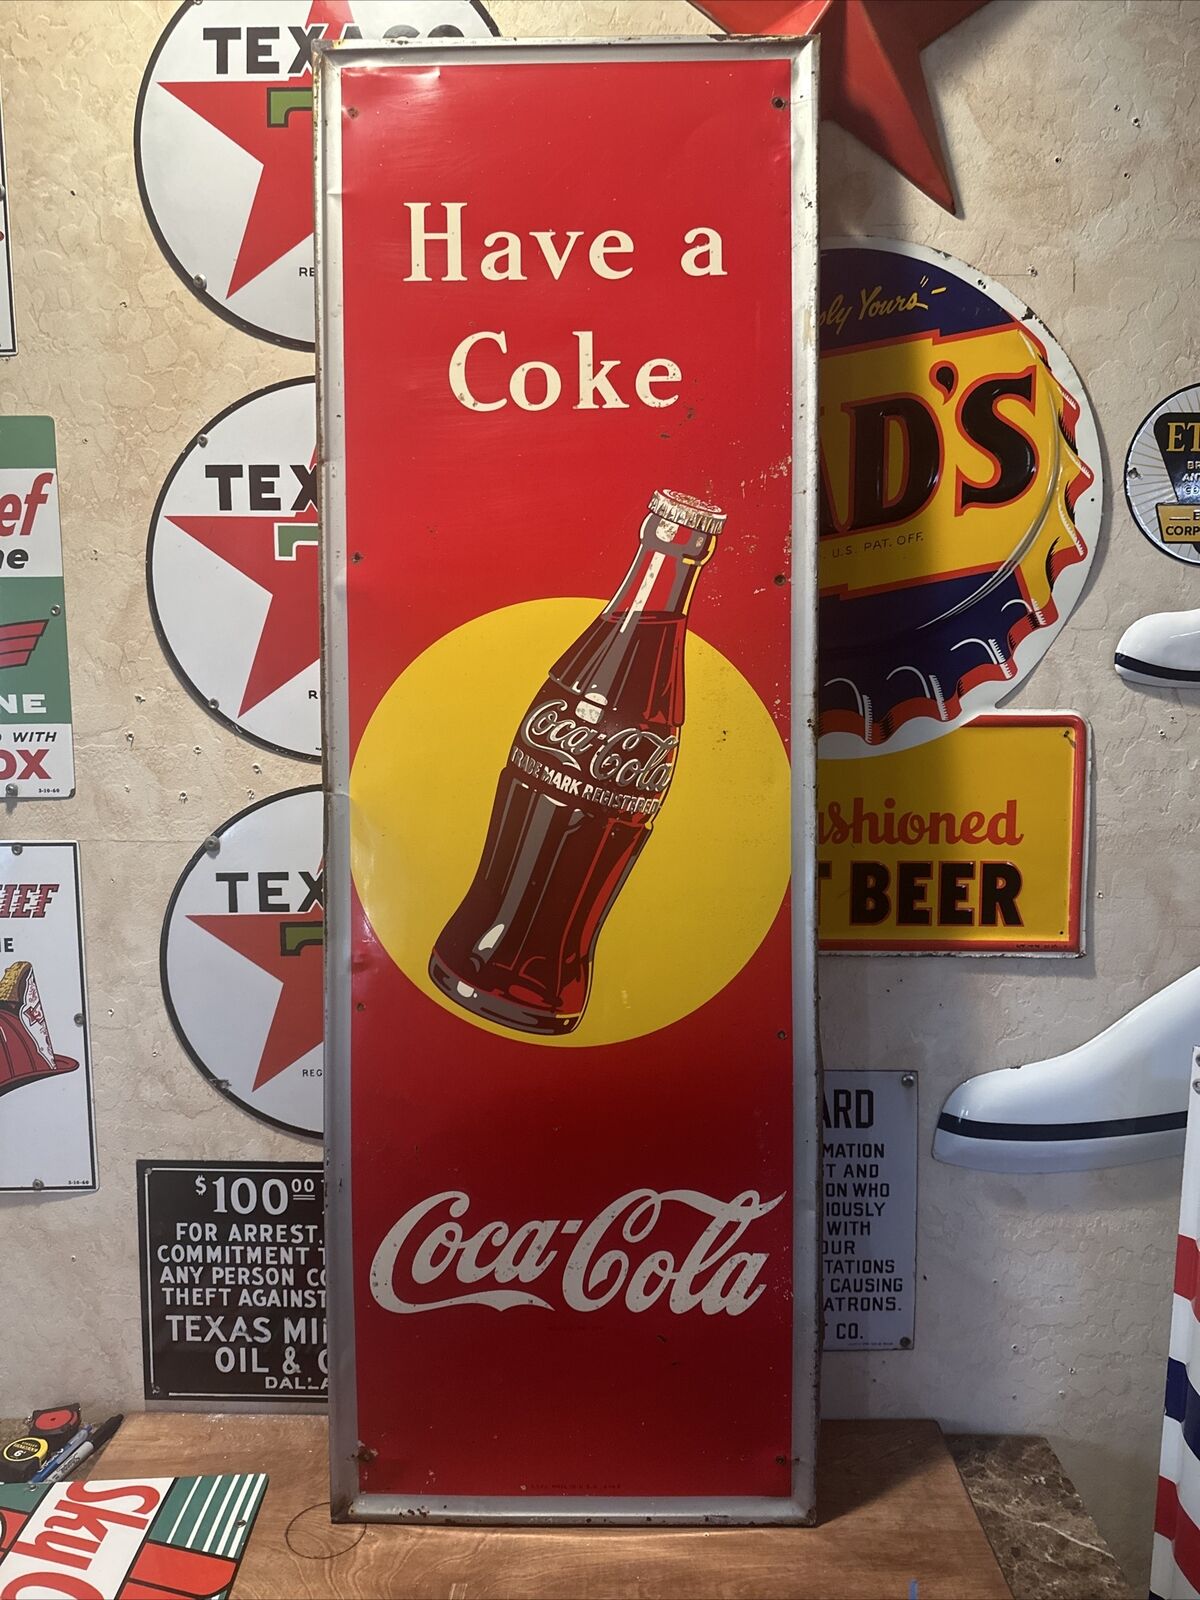 LG. ORIGINAL ''HAVE A COKE'' METAL SIGN 54X18 INCH MARKED RSC 4-48 MADE IN USA